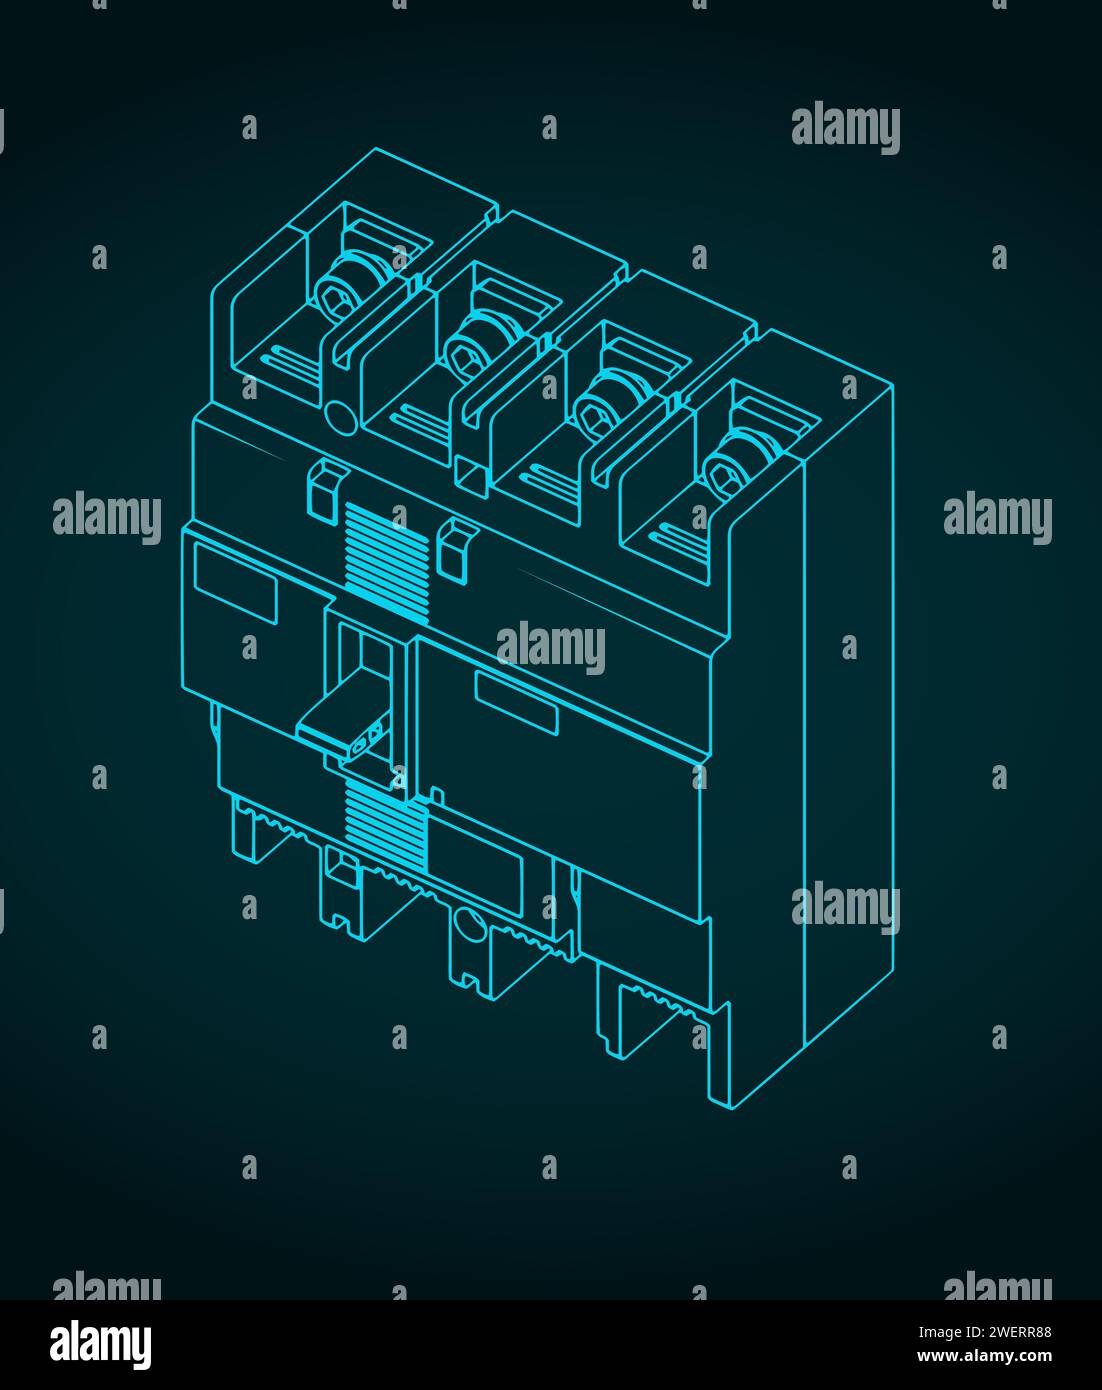 Stylized vector illustration of blueprint of a circuit breaker Stock Vector